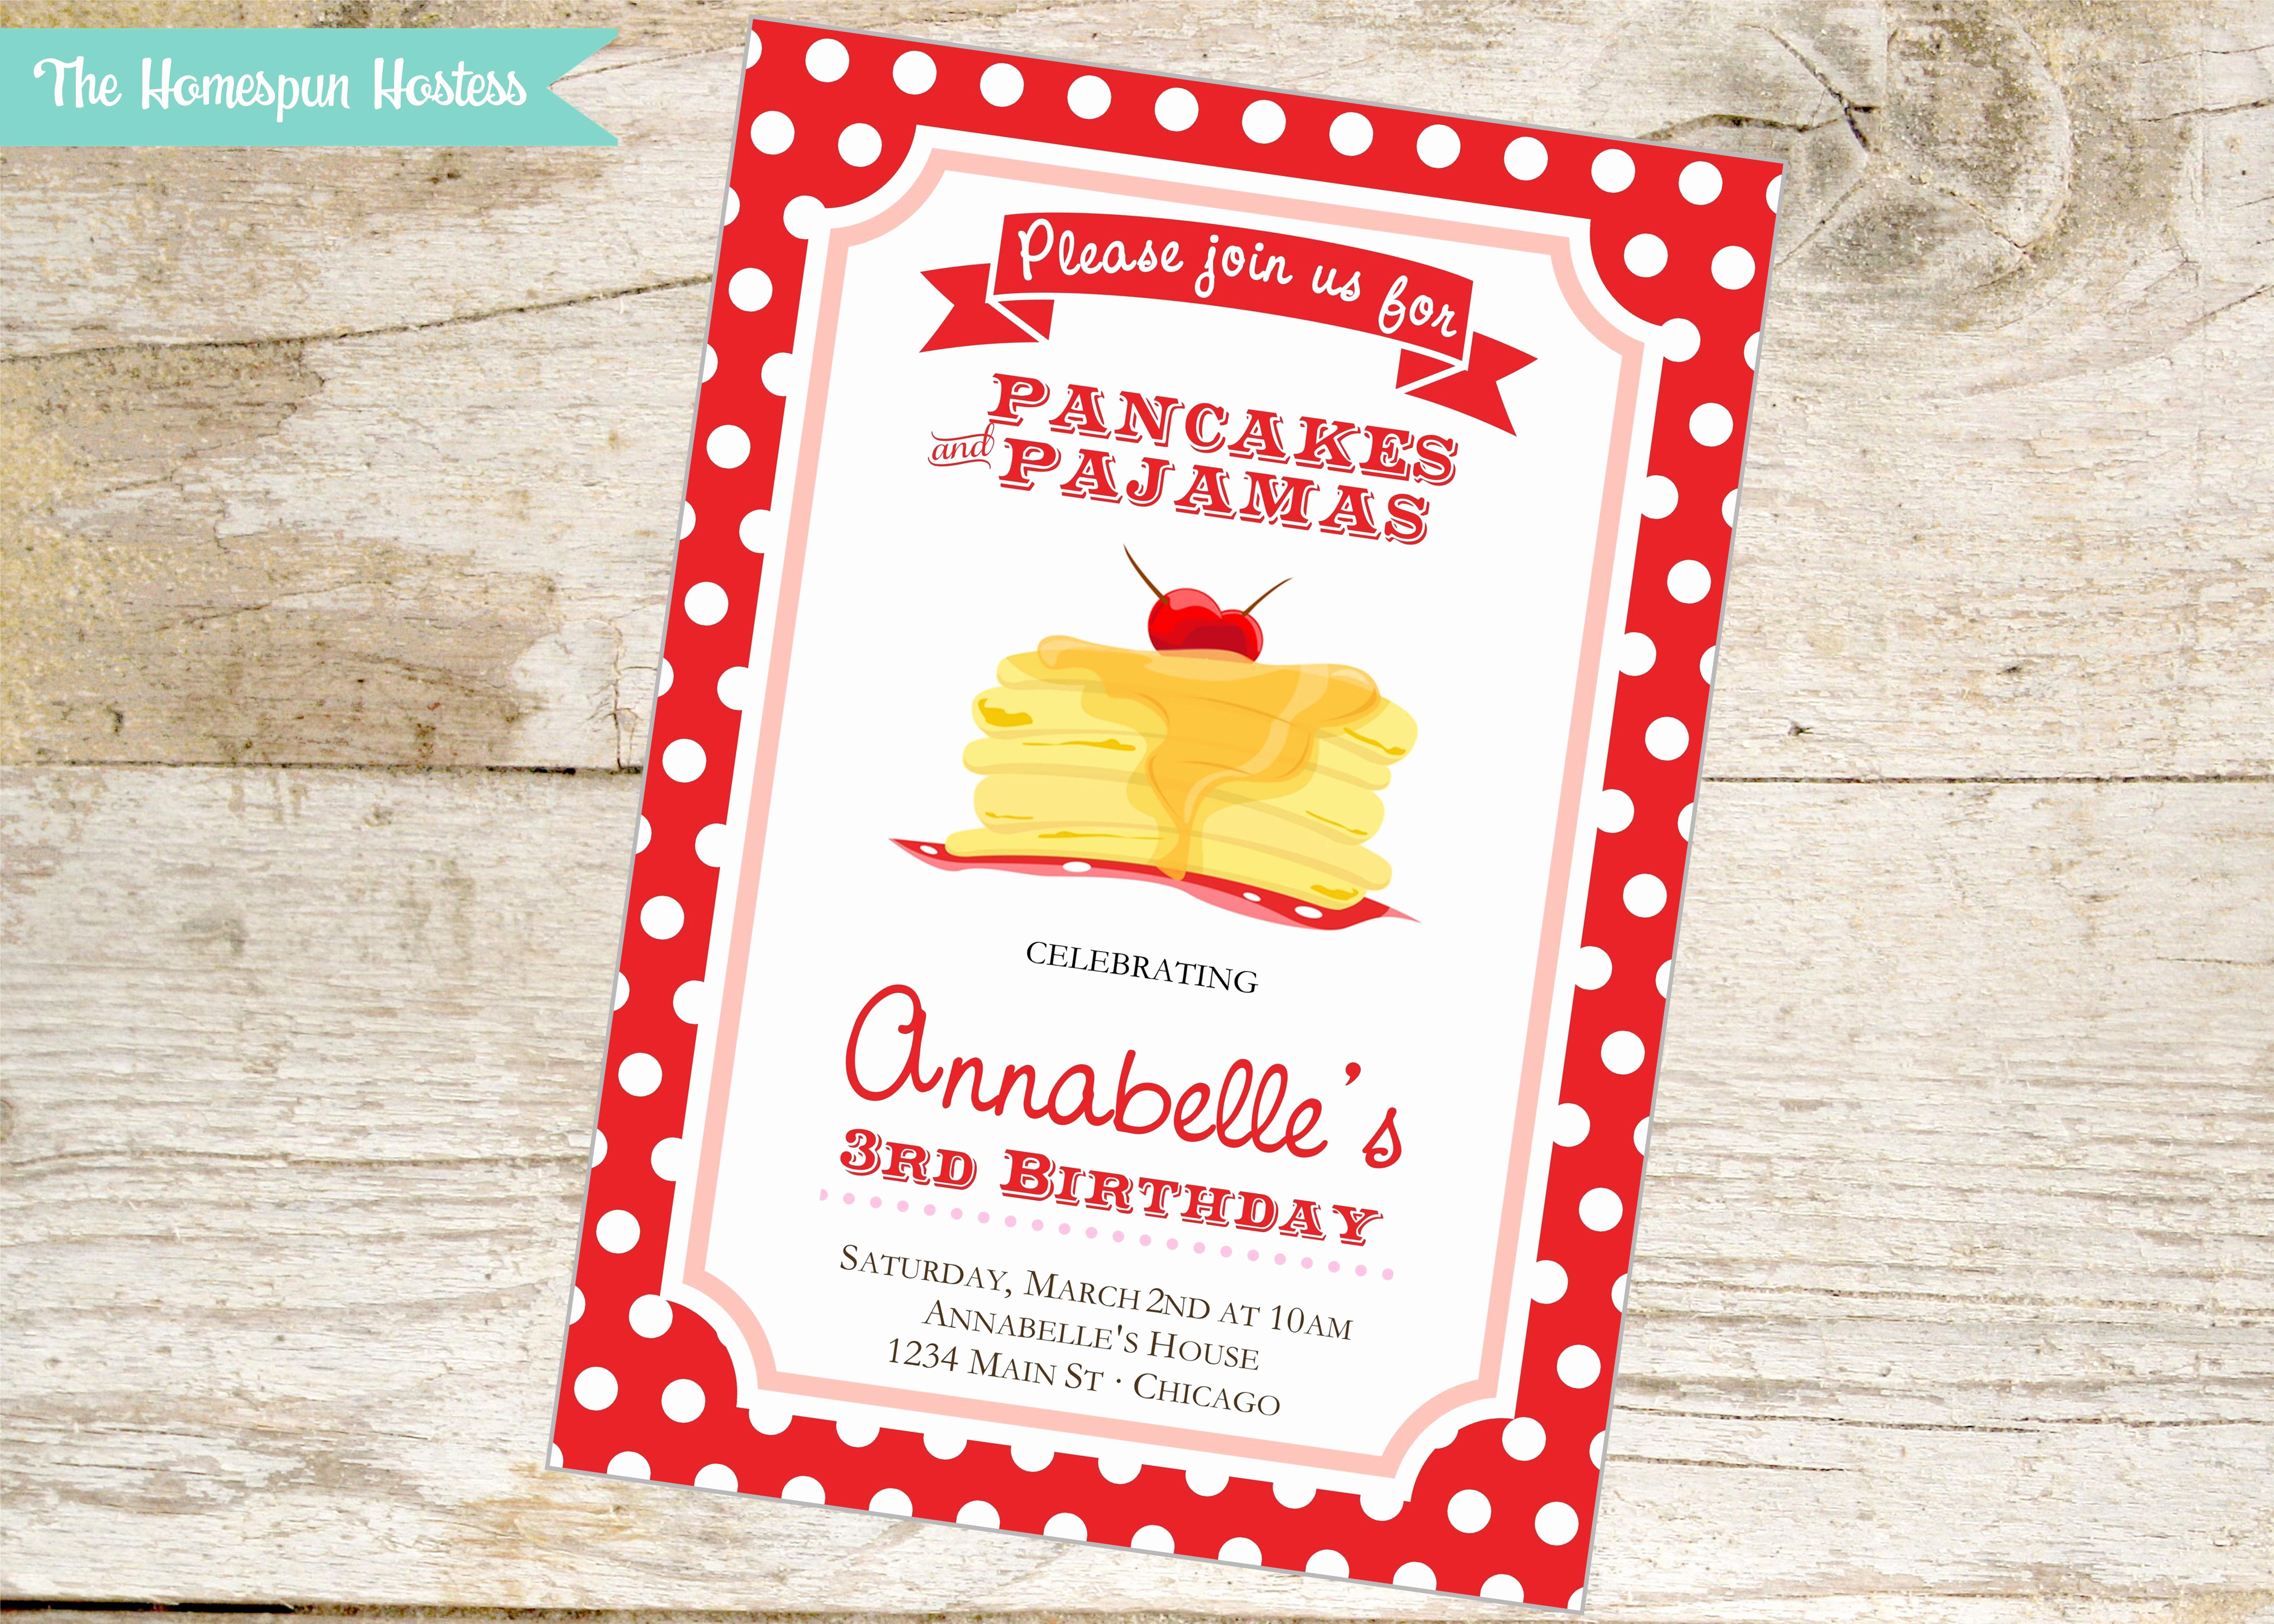 Pancakes and Pajamas Invitation Luxury Pancakes and Pjs Printable Party Invite In Red Polka Dots